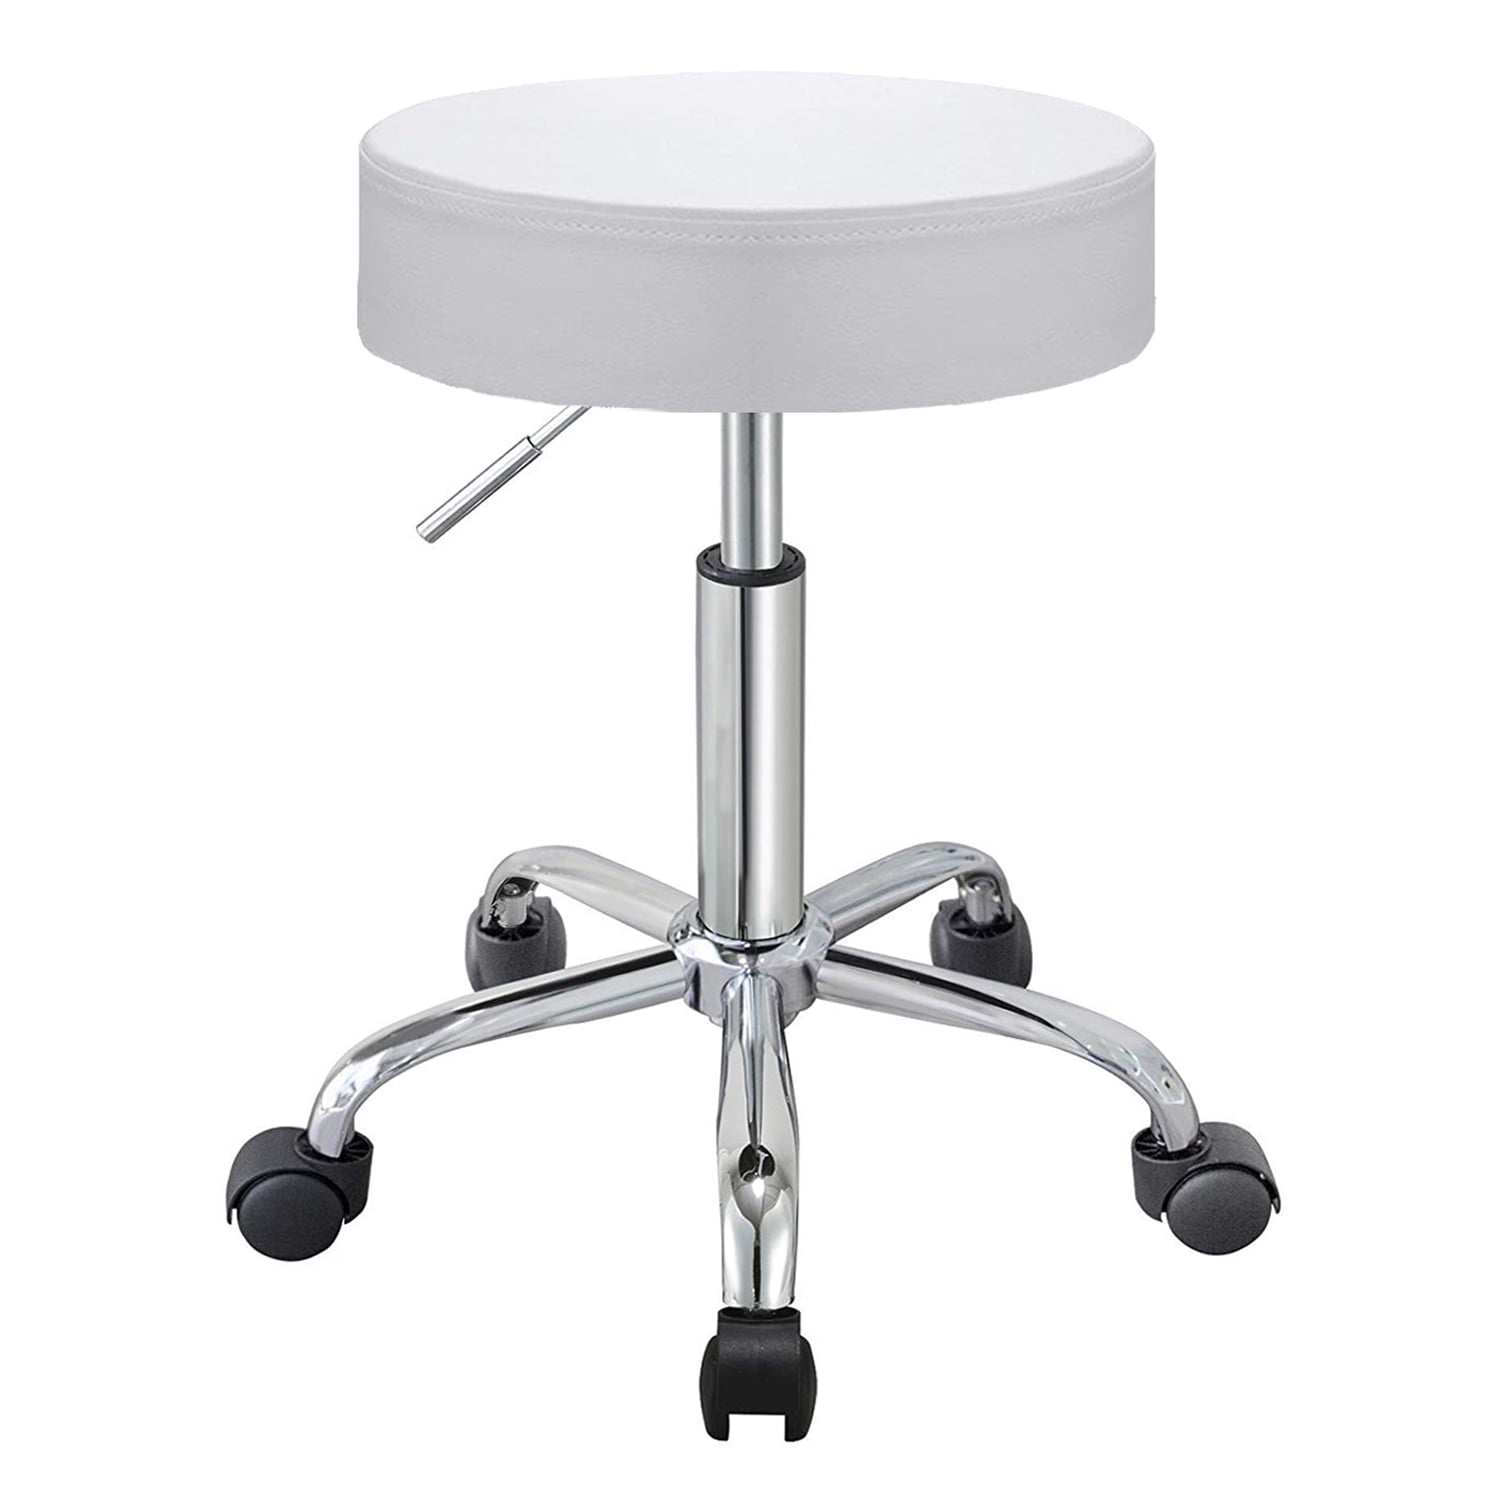 Round Rolling Stool workshop stool office stool with Back PU Leather Height Adjustable Swivel SPA Salon Stools Chair with Wheels